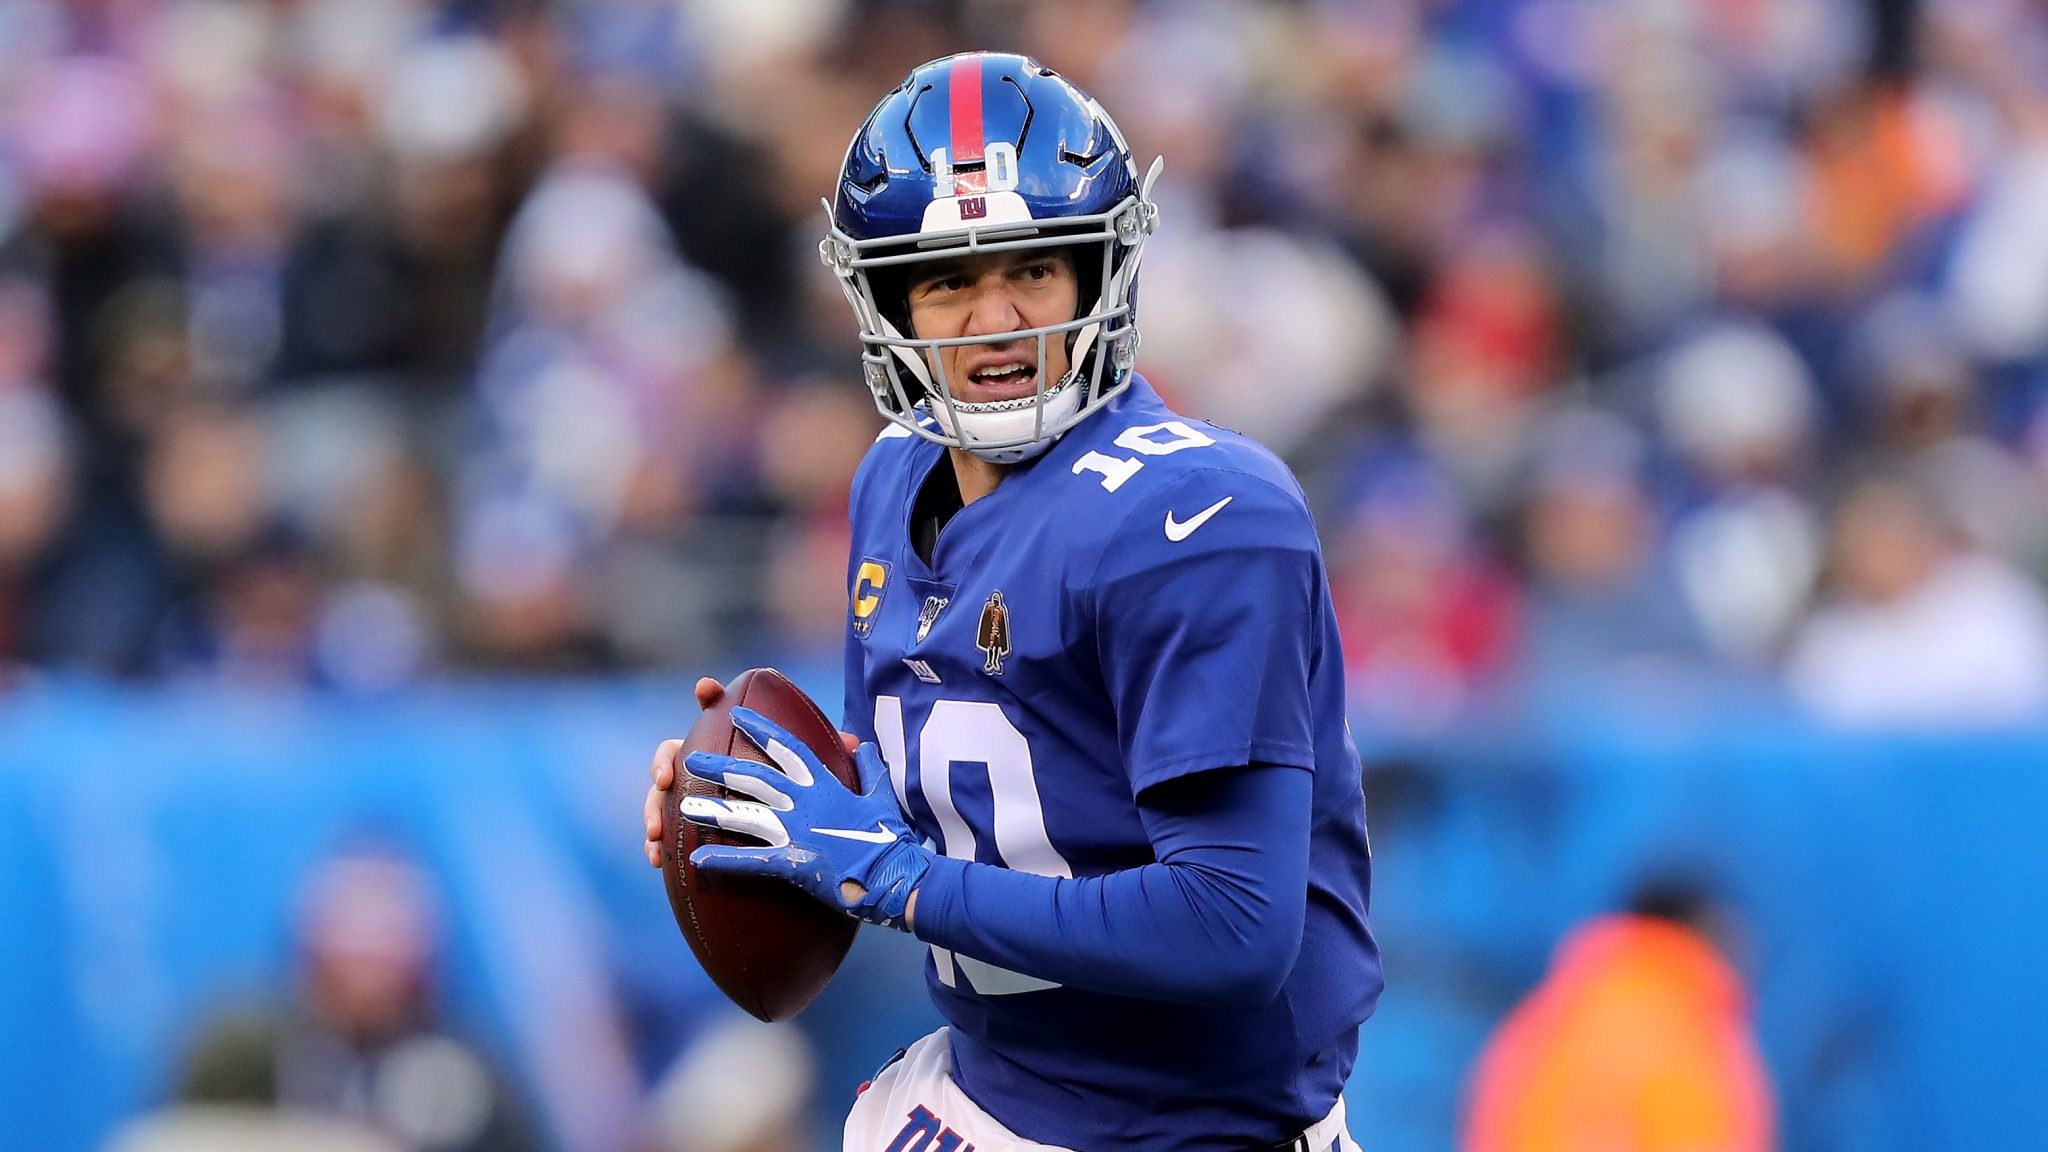 EAST RUTHERFORD, NEW JERSEY - DECEMBER 15: Eli Manning #10 of the New York Giants looks to pass the ball to Sterling Shepard #87 for the first down in the third quarter against the Miami Dolphins at MetLife Stadium on December 15, 2019 in East Rutherford, New Jersey.